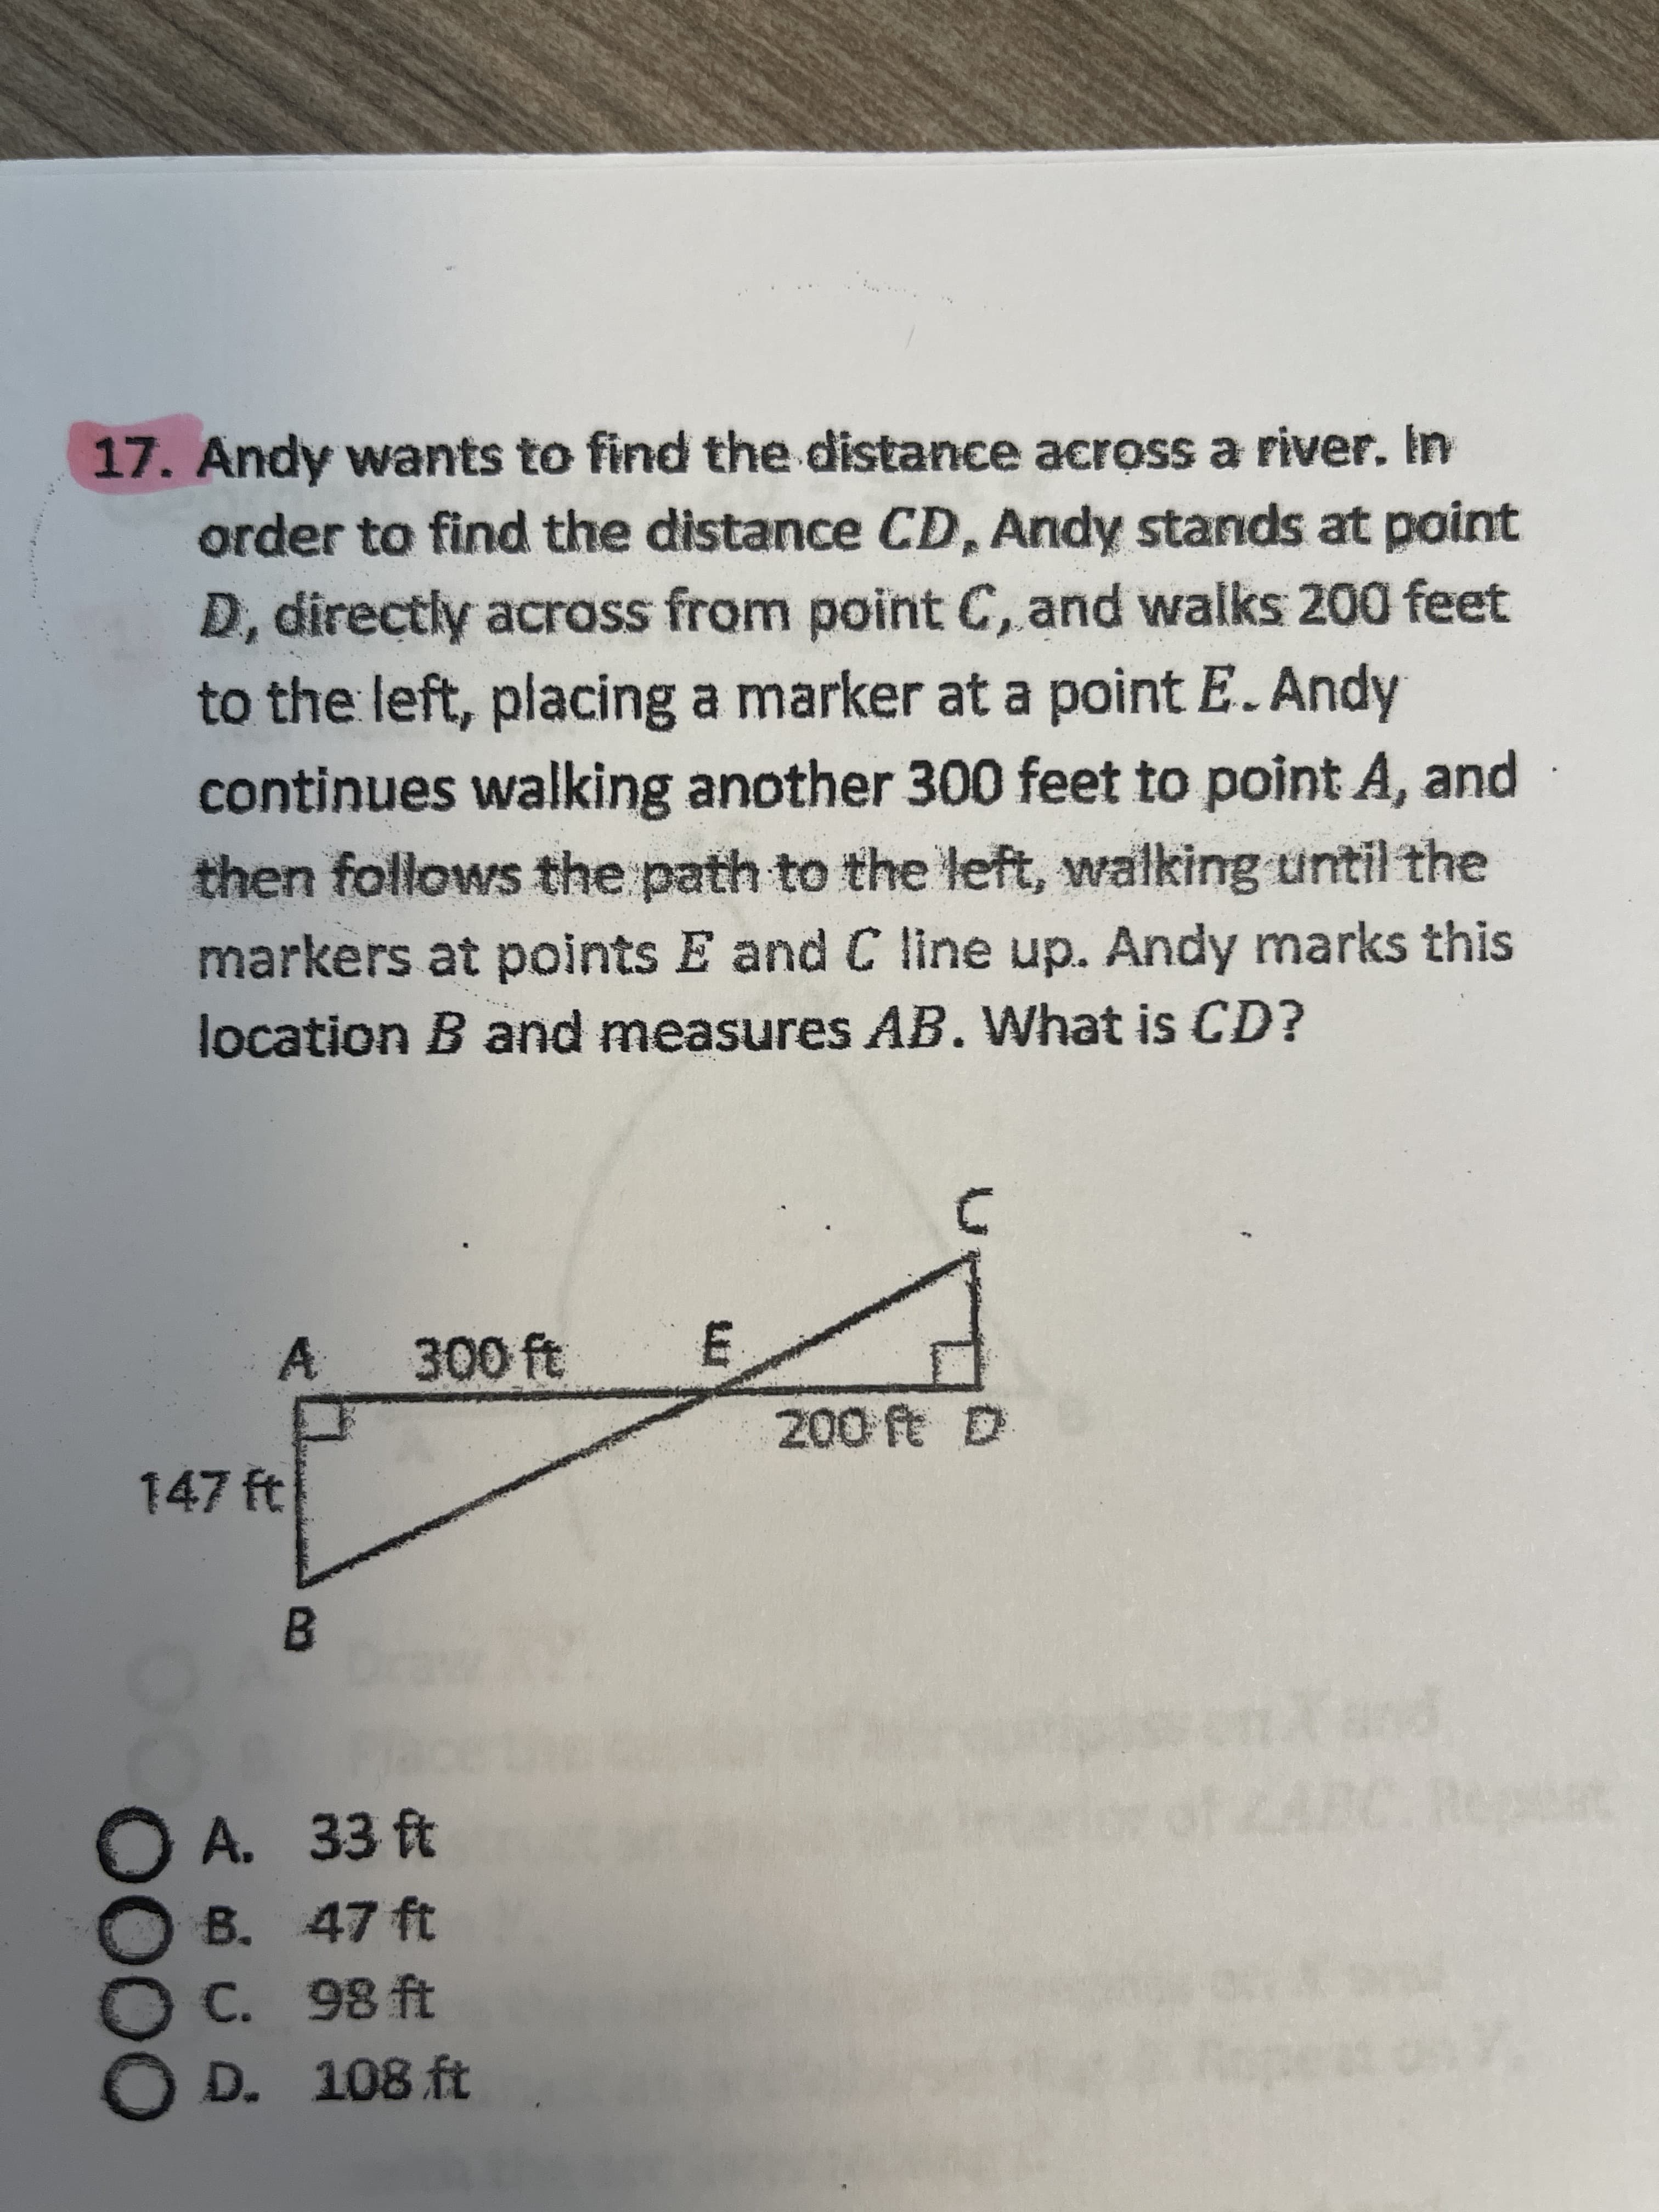 OOOO
17.Andy wants to find the distance across a river. In
order to find the distance CD, Andy stands at point
D, directly acrass from point C, and walks 200 feet
to the left, placing a marker at a point E. Andy
continues walking another 300 feet to point A, and
then follows the path to the left, walking until the
markers at points E and C line up. Andy marks this
location B and measures AB. What is CD?
A 300 ft
E,
147 ft
B.
A. 33 ft
B. 47 ft
C. 98 ft
D. 108 ft
